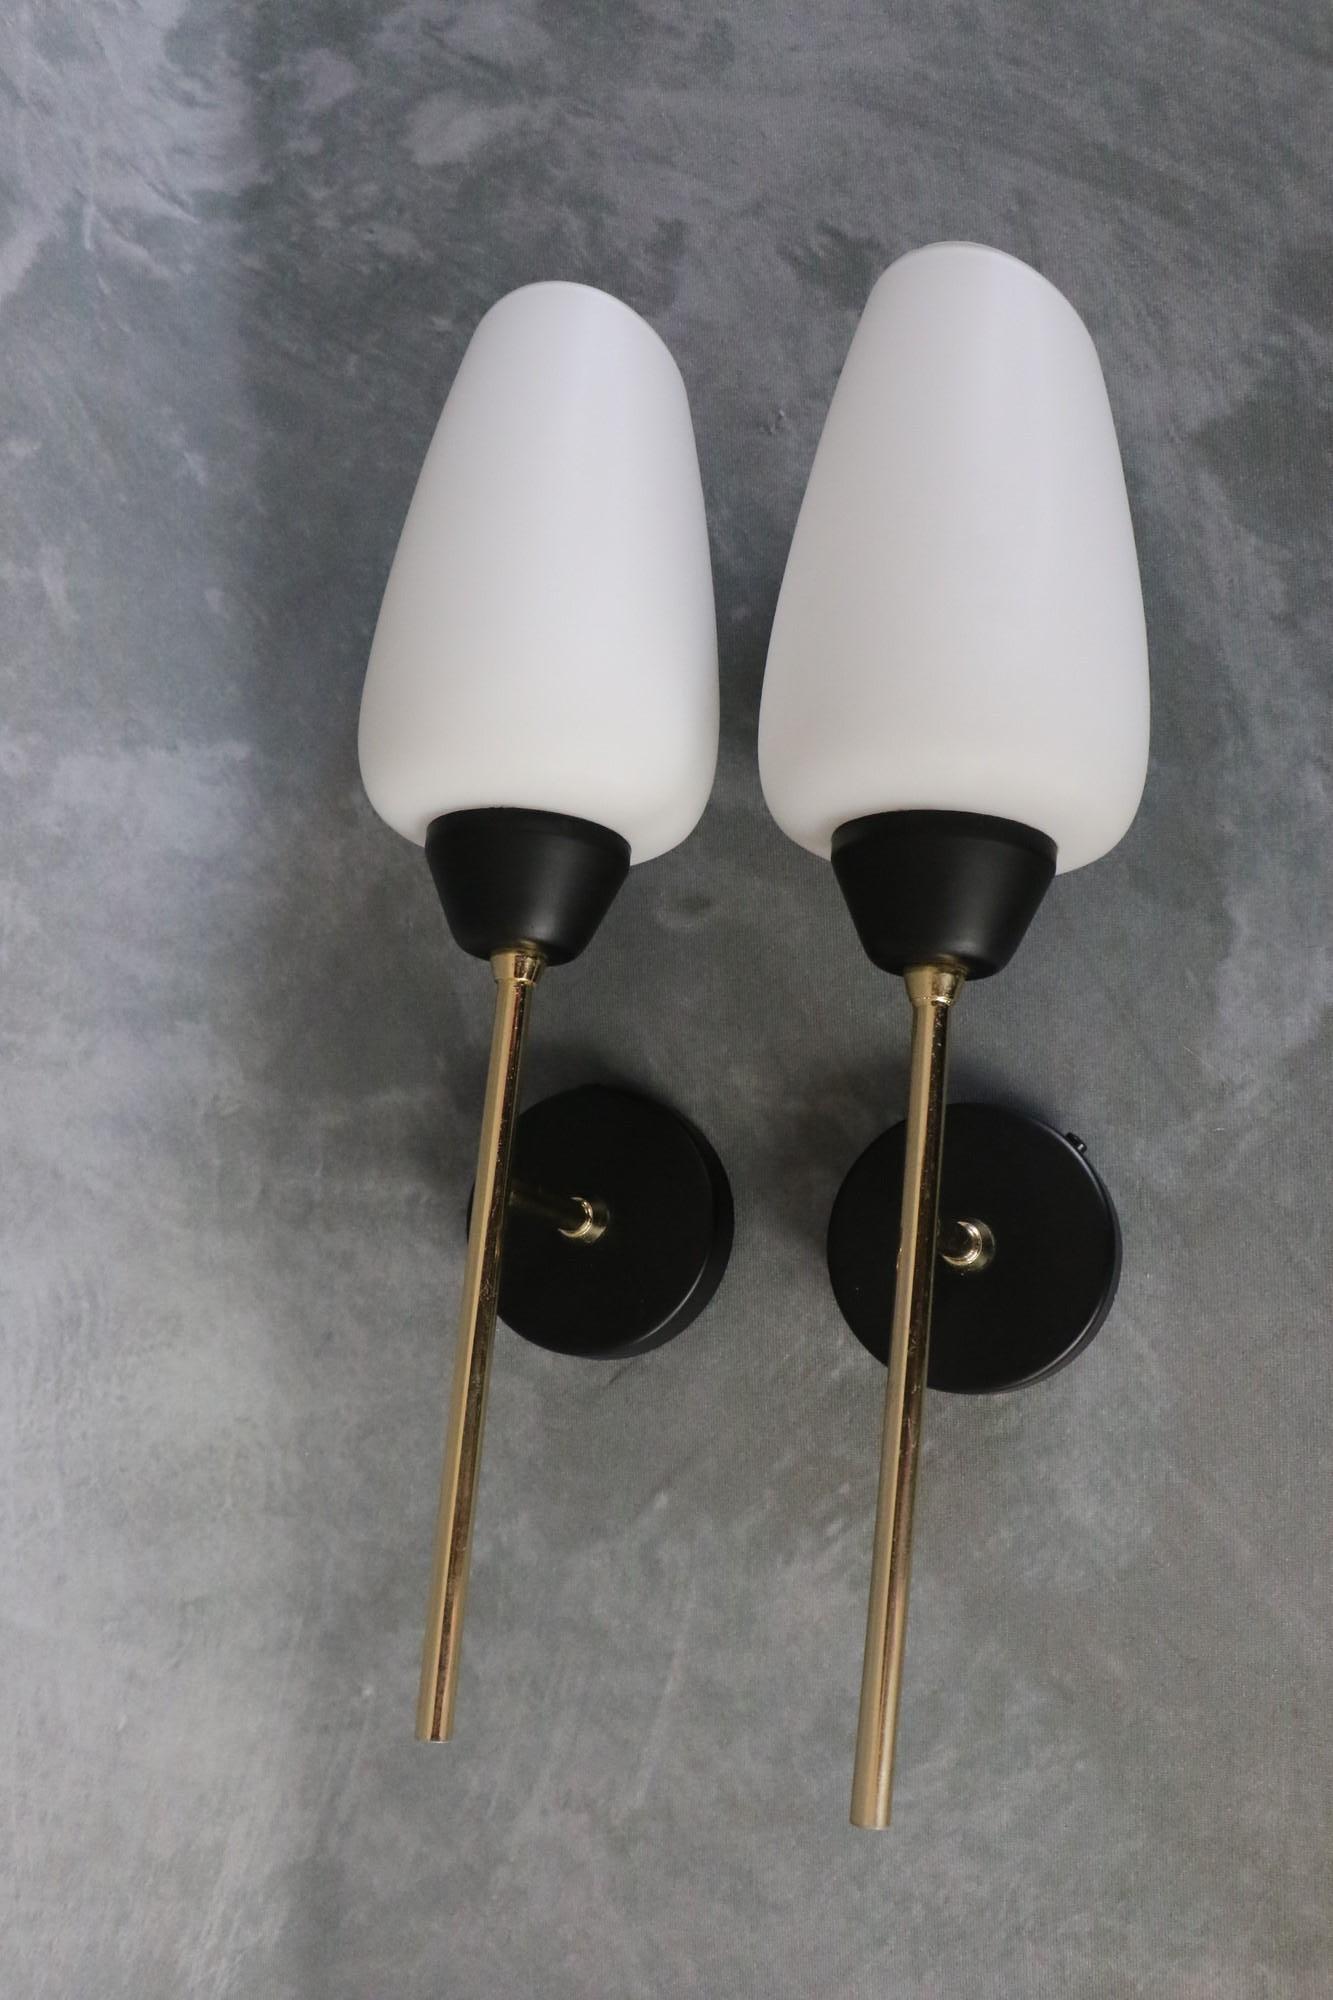 French Maison Lunel, Pair of Mid-Century Modern Wall Lights, 1950s, France